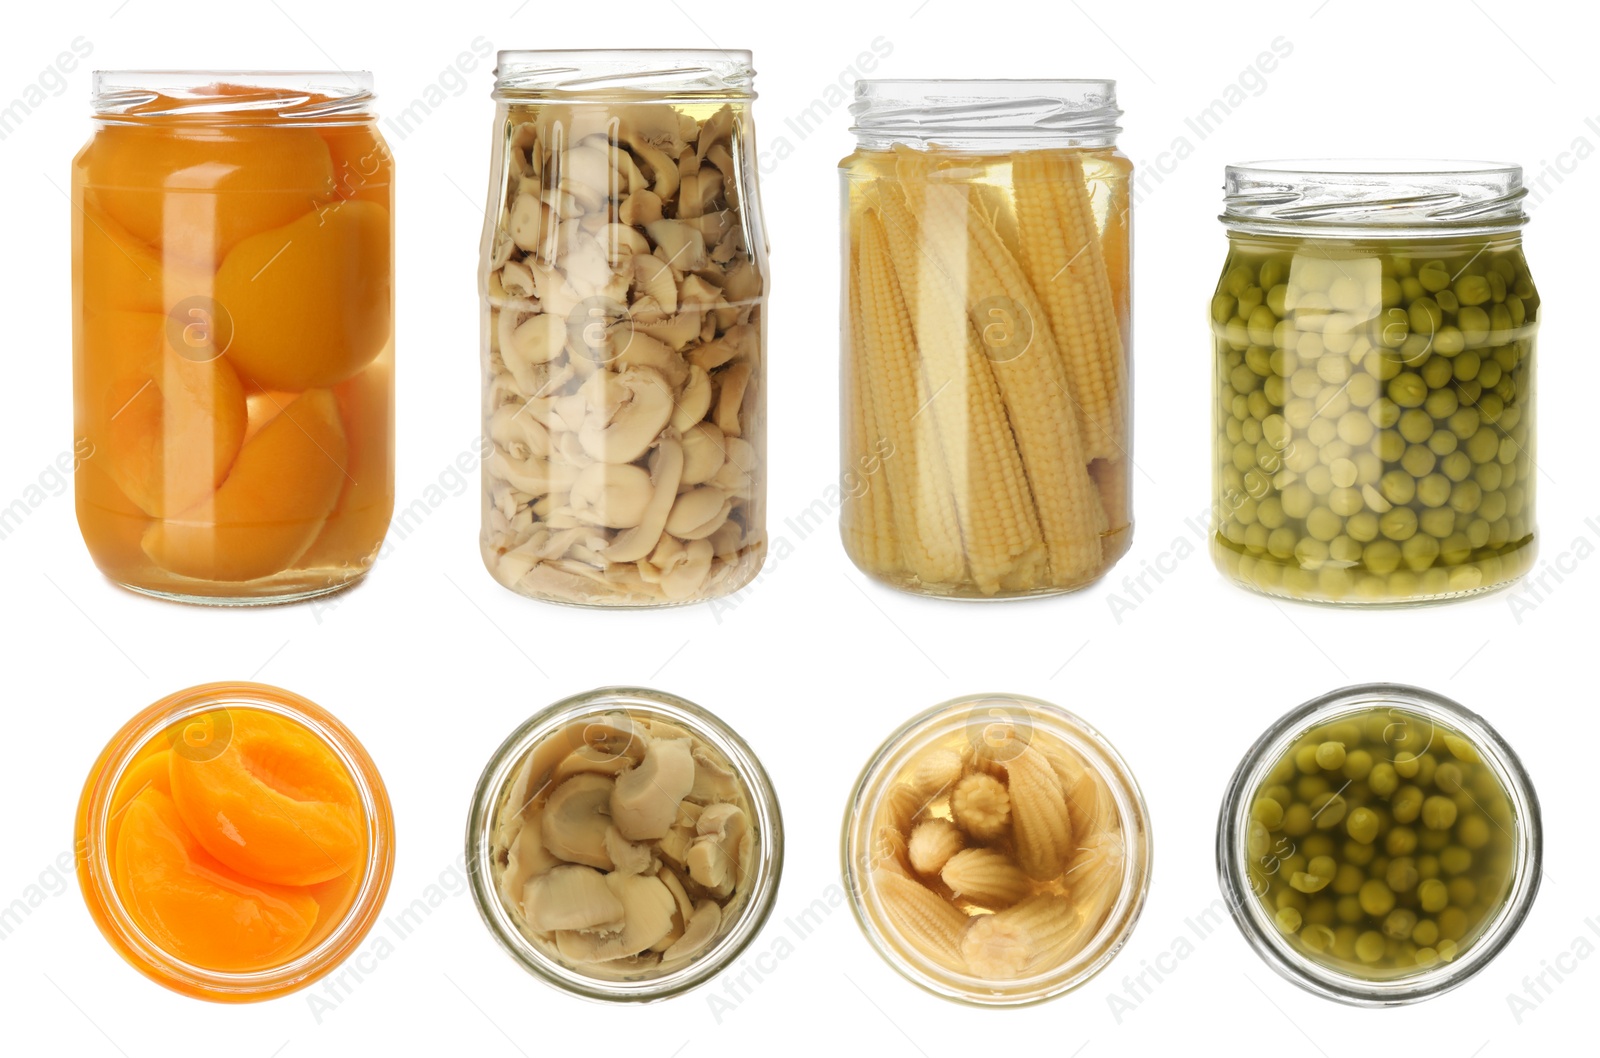 Image of Set of jars with pickled foods on white background, top and side views